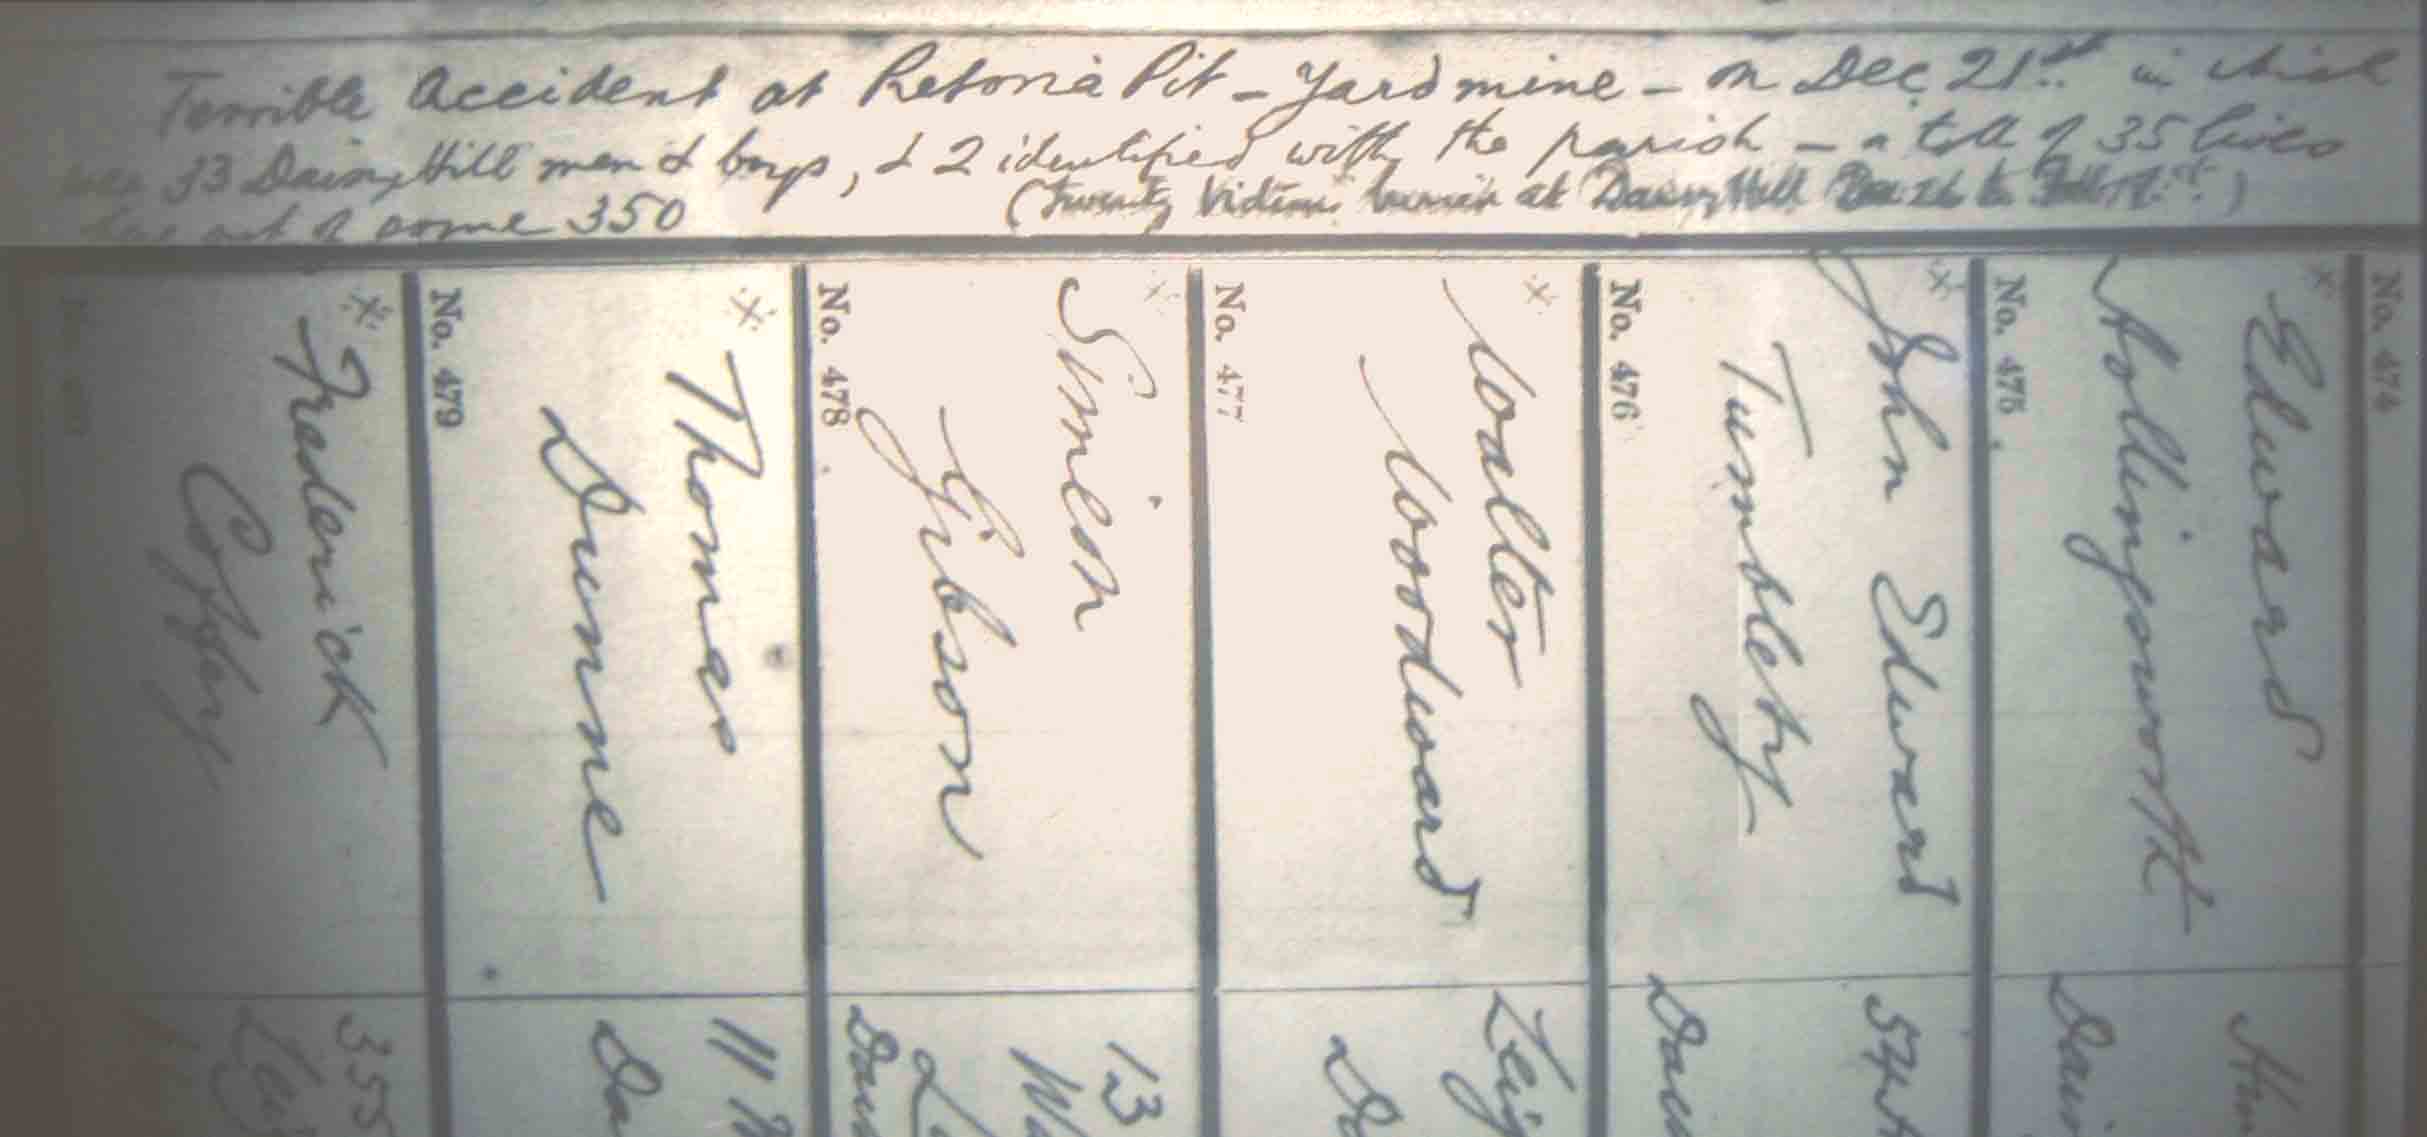 Vicars note added to the burial register of St James the Great, Daisy Hill telling of the disaster and recording the number of his parishioners who perished